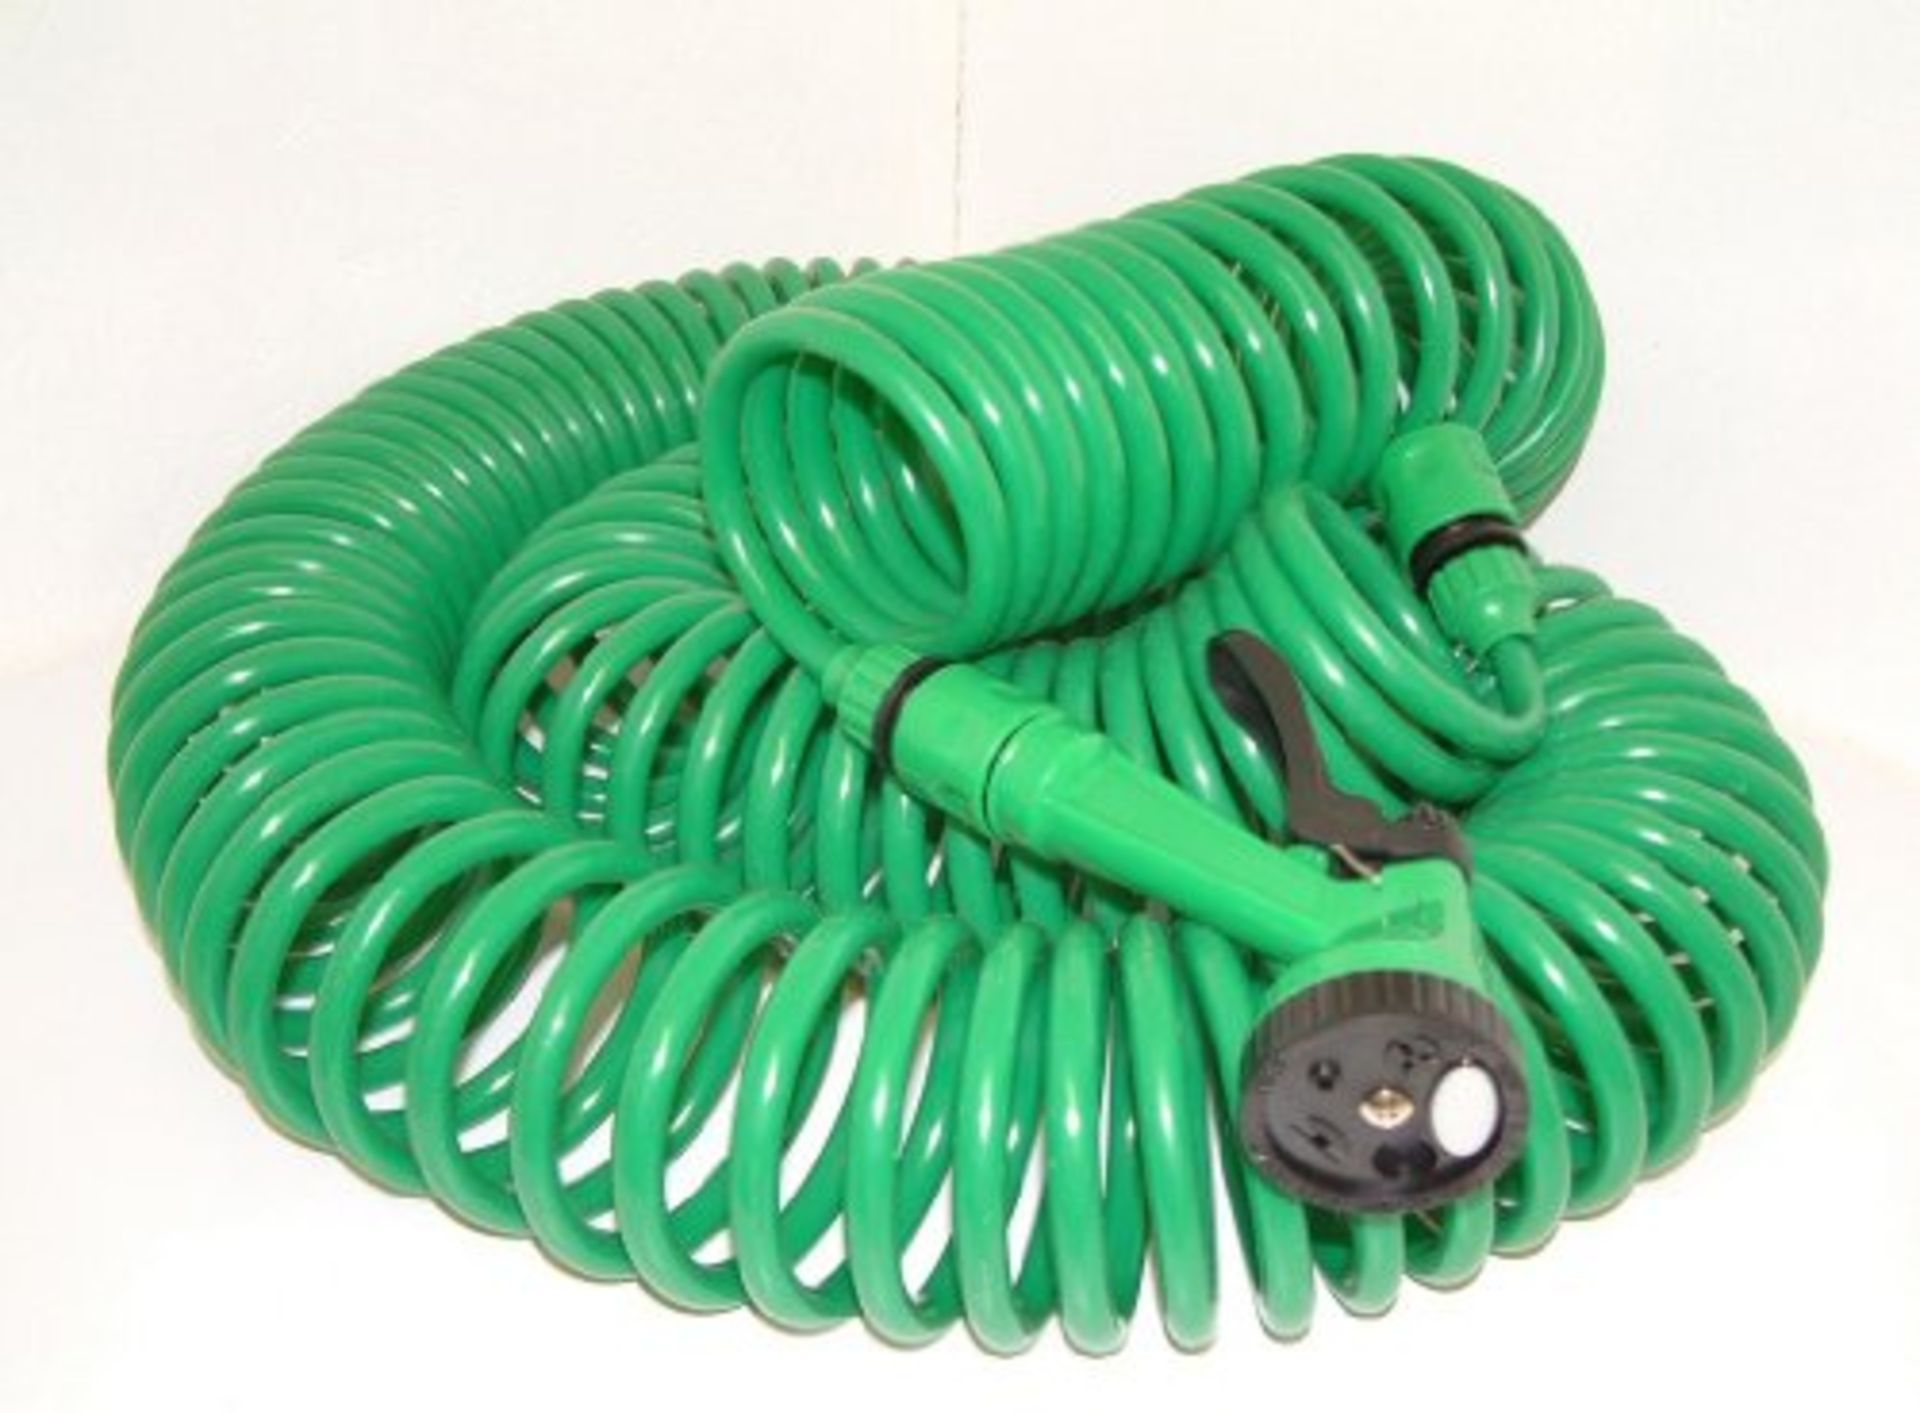 V Brand New 30 Metre Coil Hose With Nozzle And Tap Connectors Etc - Image 2 of 2